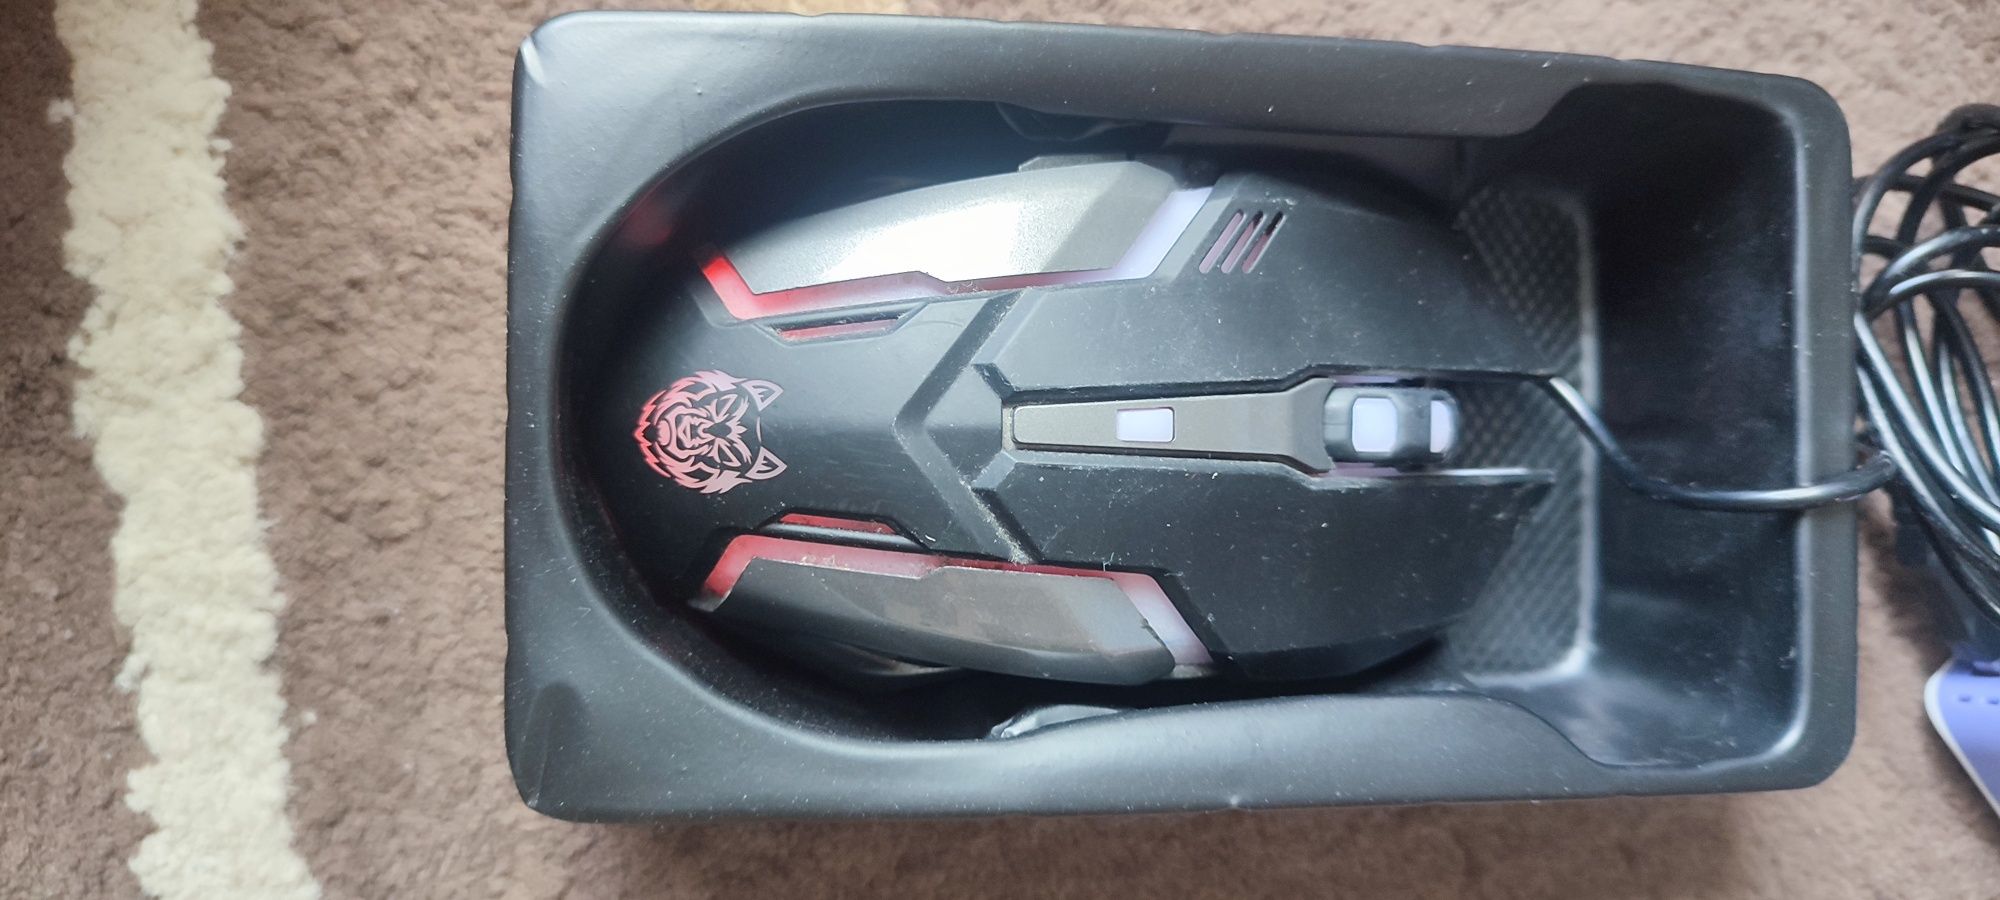 Mouse gaming cu rgb